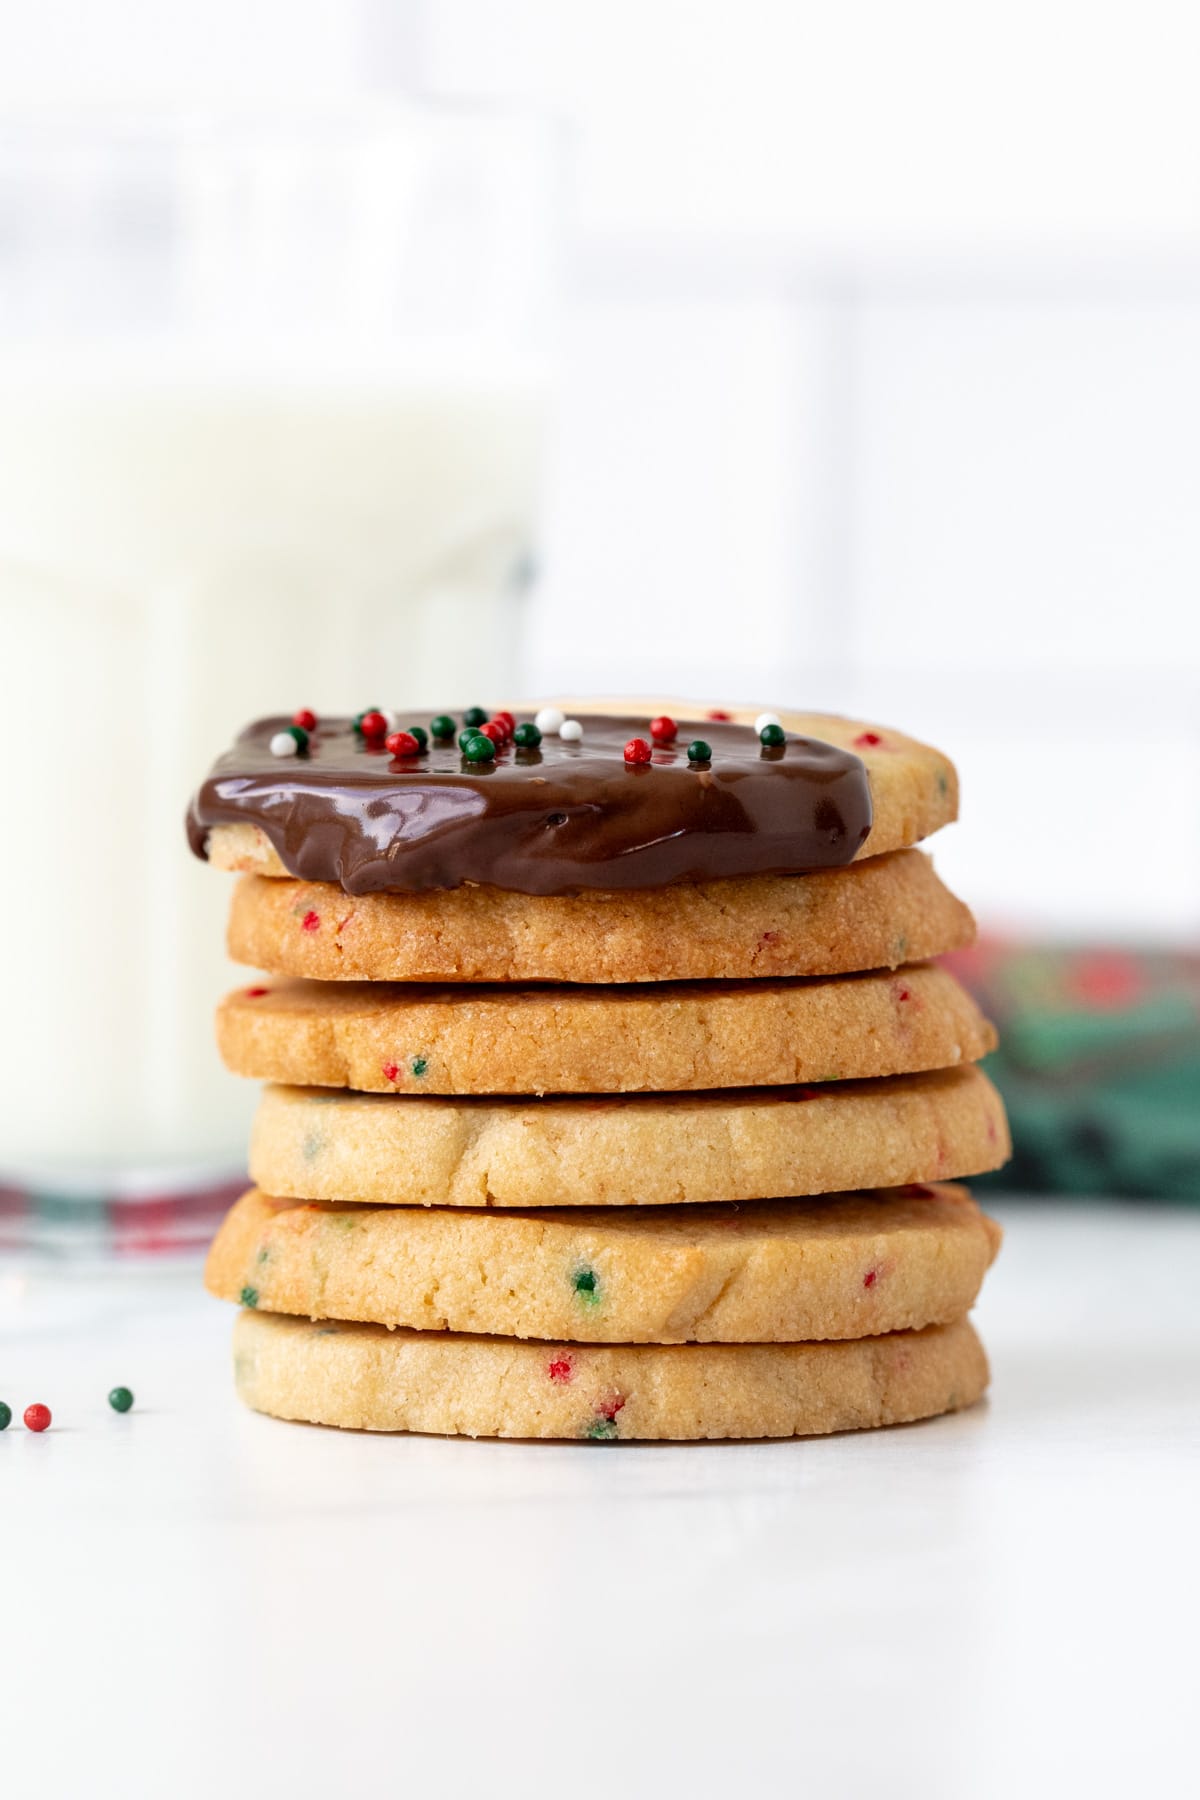 Stack of Christmas sprinkle slice and bake cookies, with top cookie dipped in chocolate